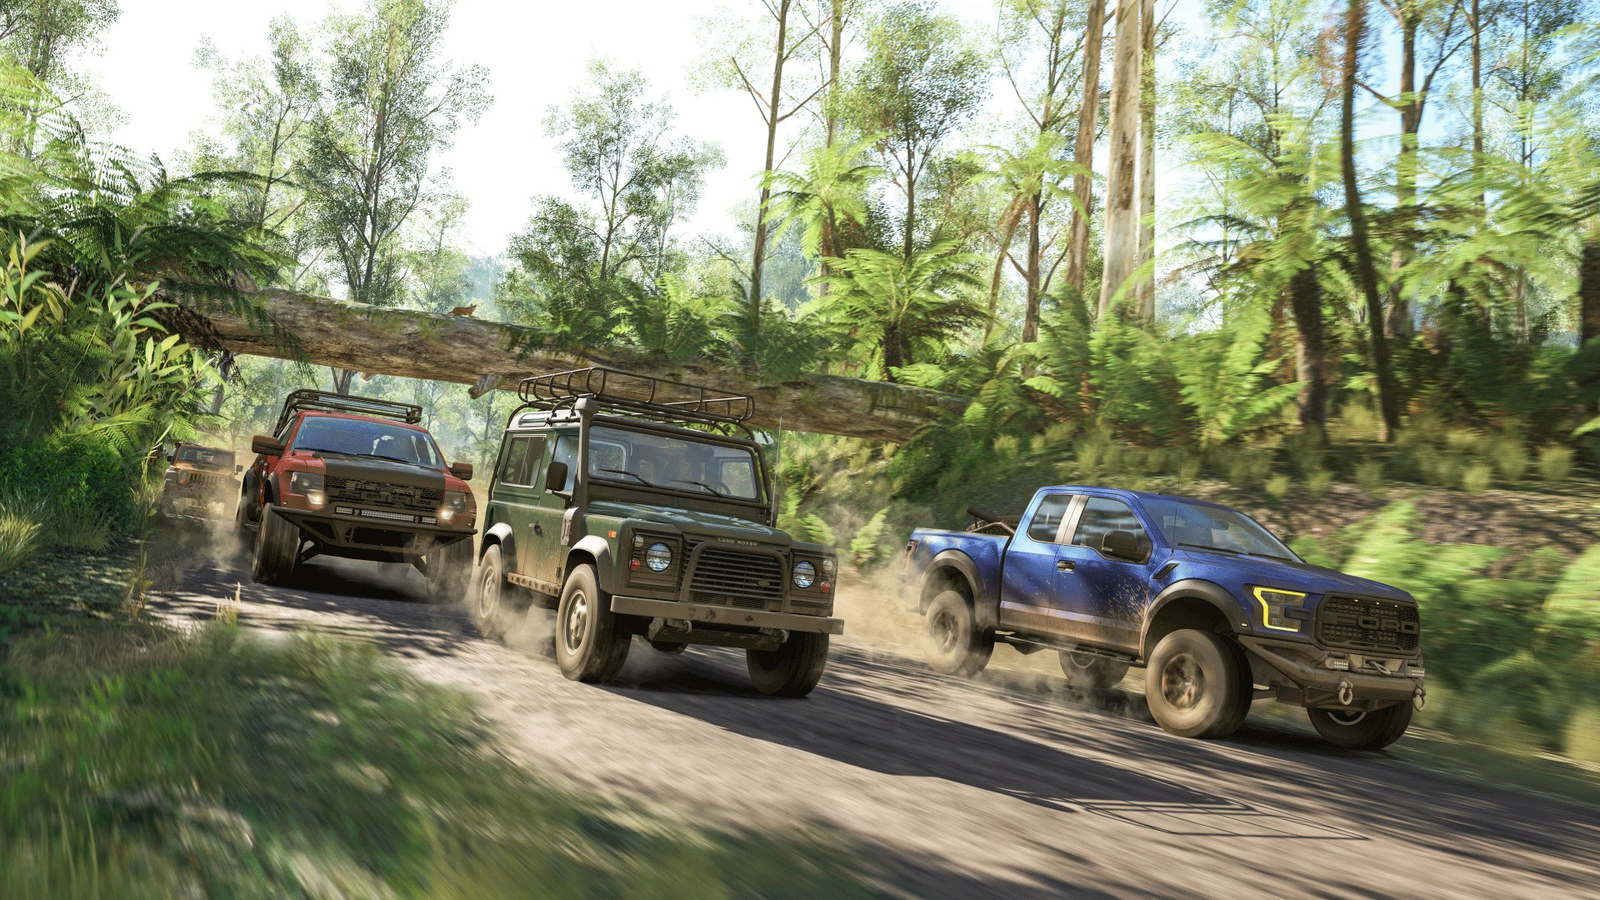 Forza Horizon 3 reaches the end of its life